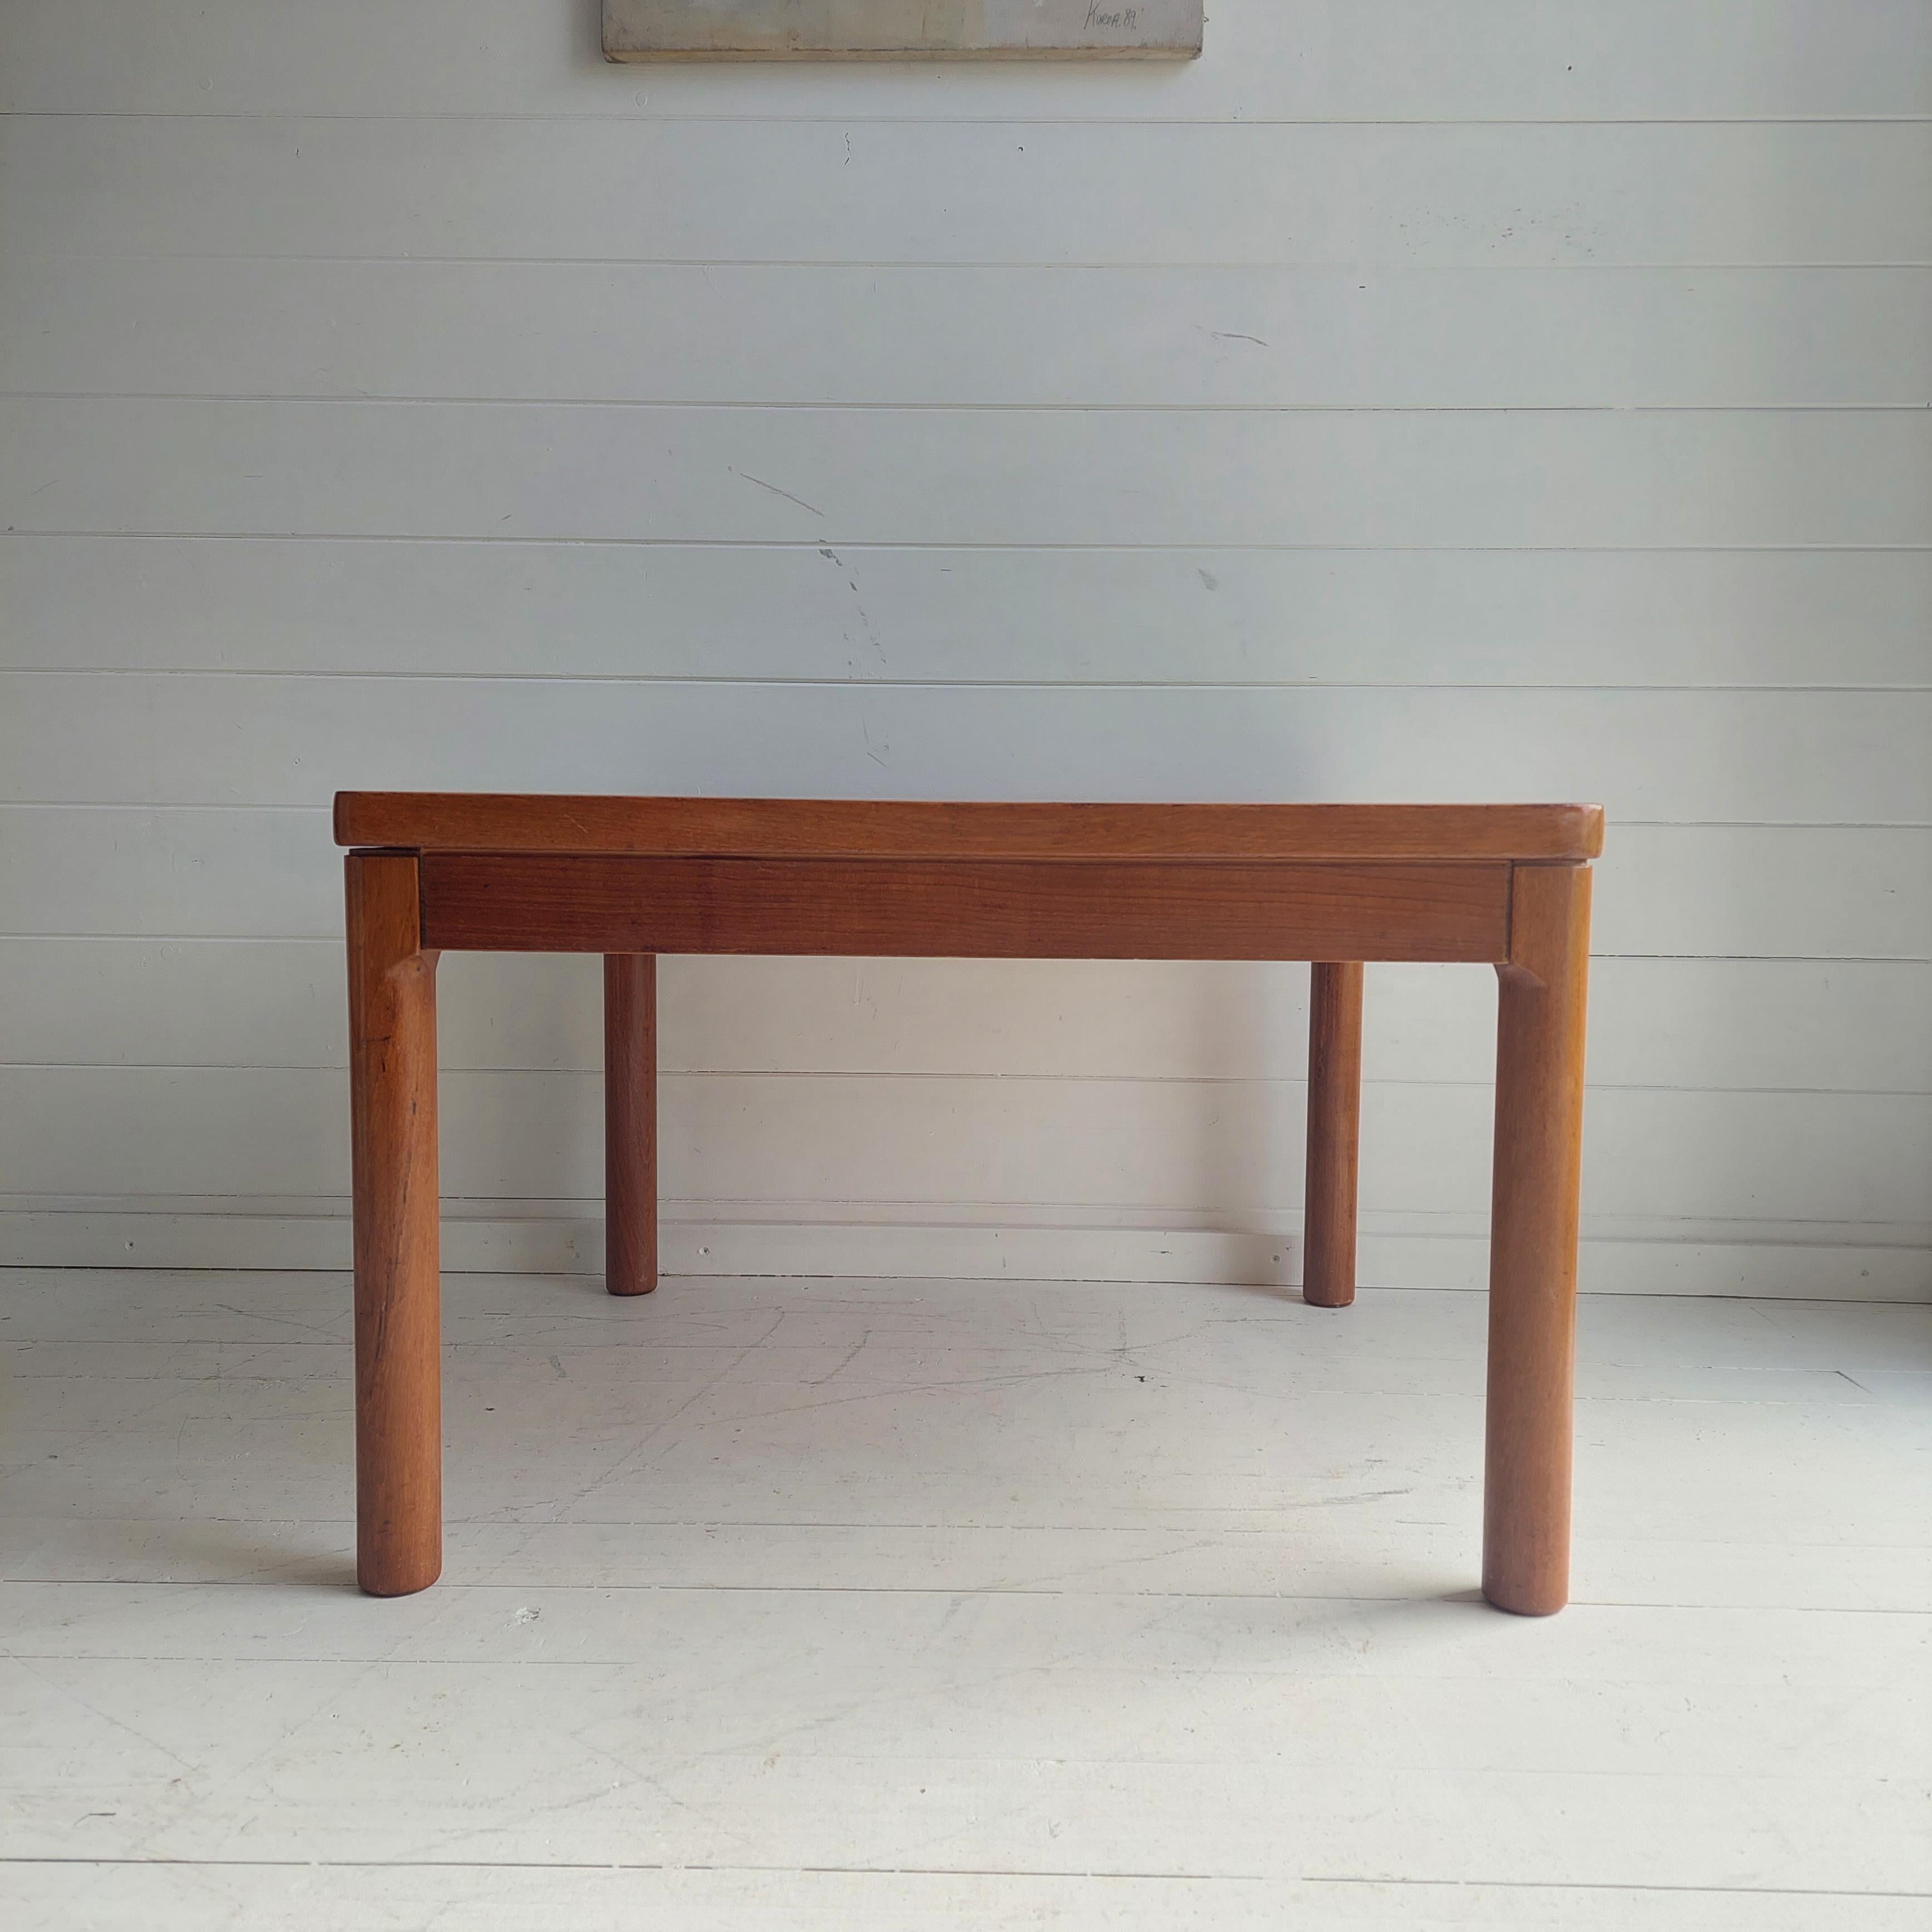 Mid-Century Danish Teak Coffee Table by Trioh 1960s Green Tiled Top Square Shape 1